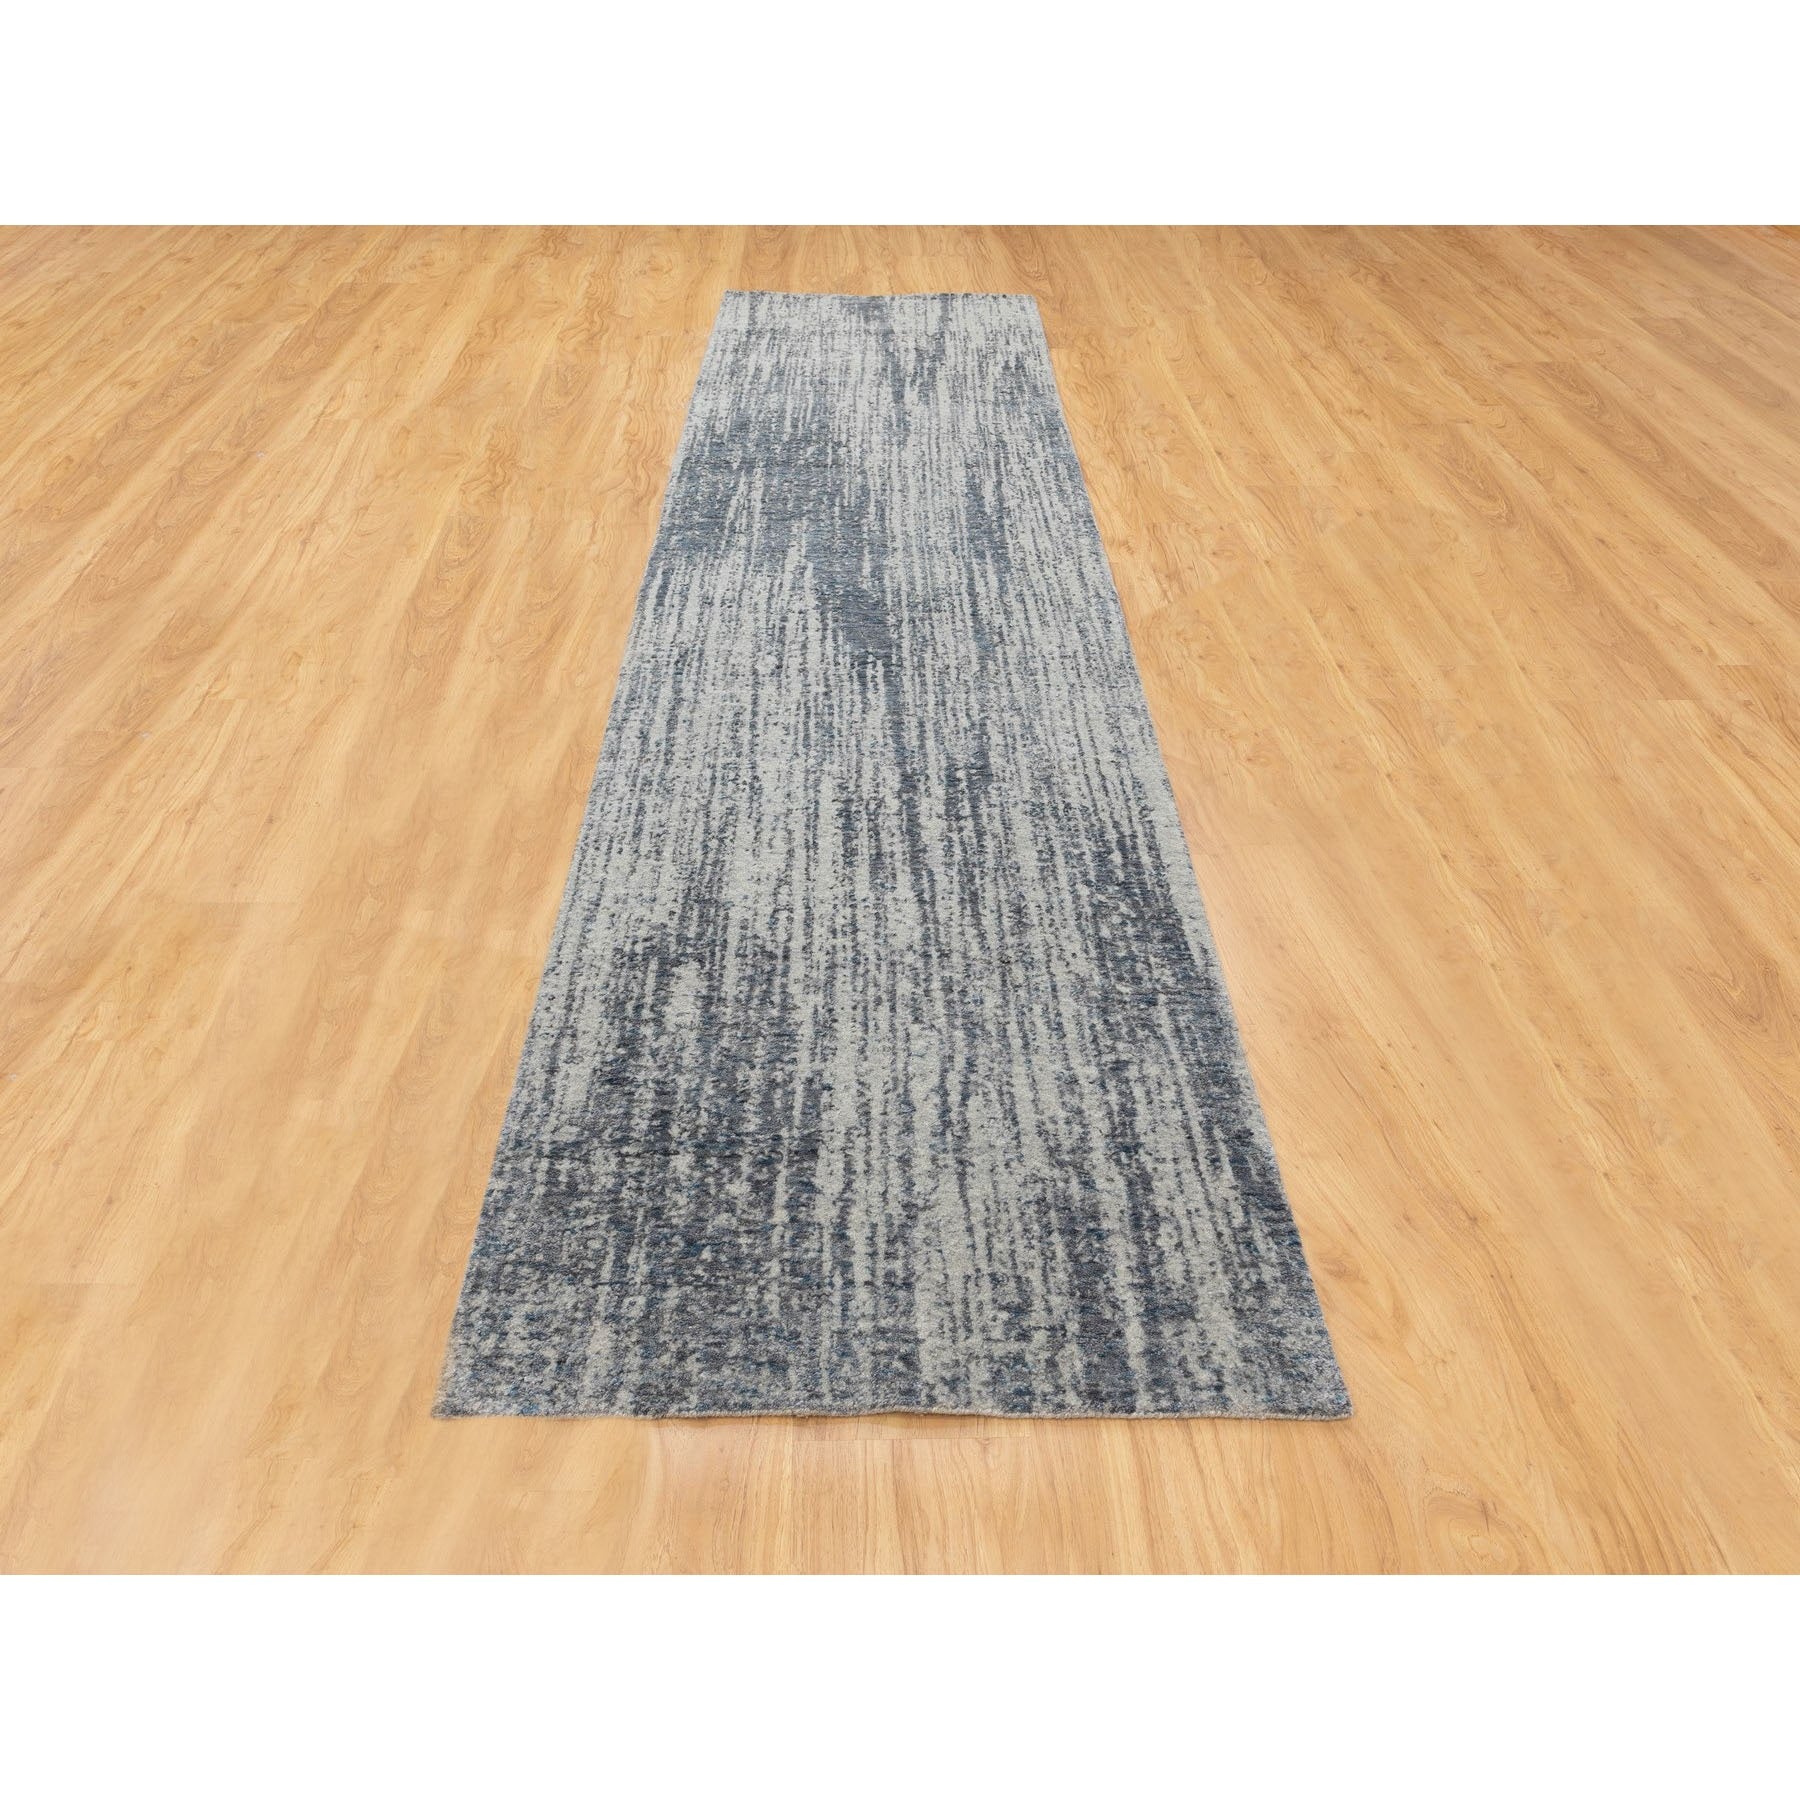 Hand Loomed Modern and Contemporary Runner > Design# CCSR58420 > Size: 2'-6" x 11'-9"